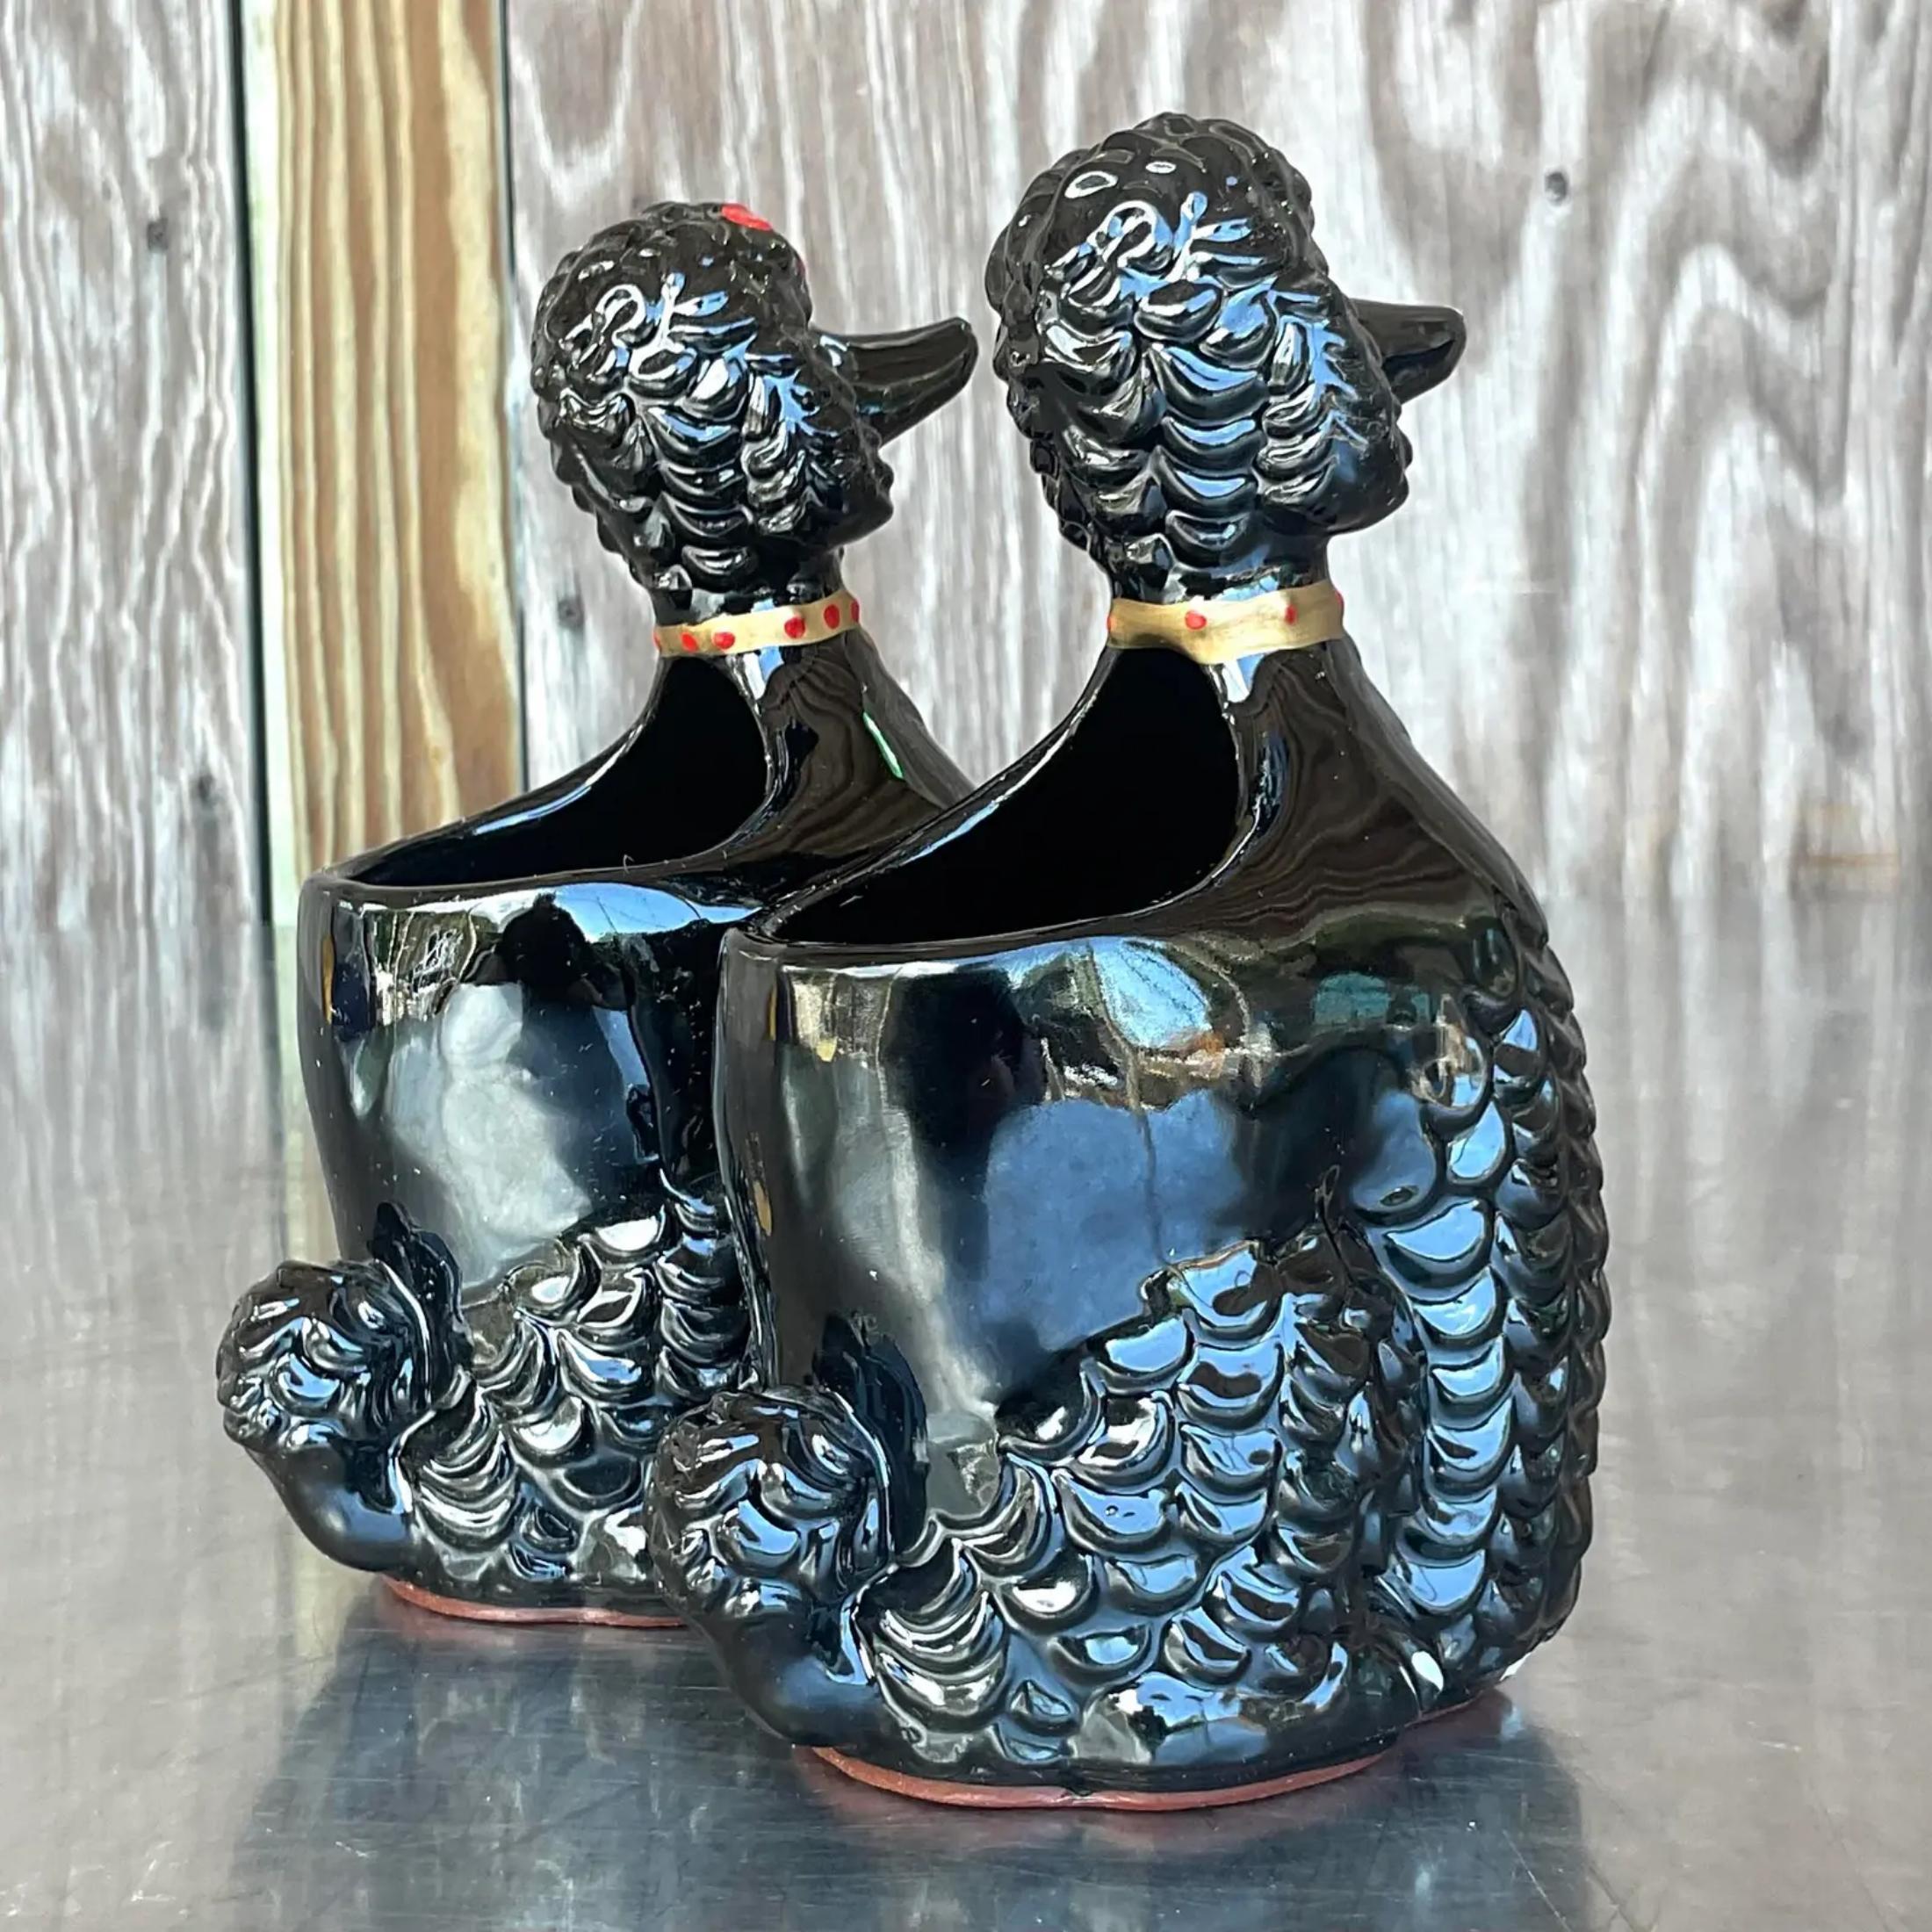 American Mid 20th Century Vintage Glazed Ceramic Poodle Planters - A Pair For Sale